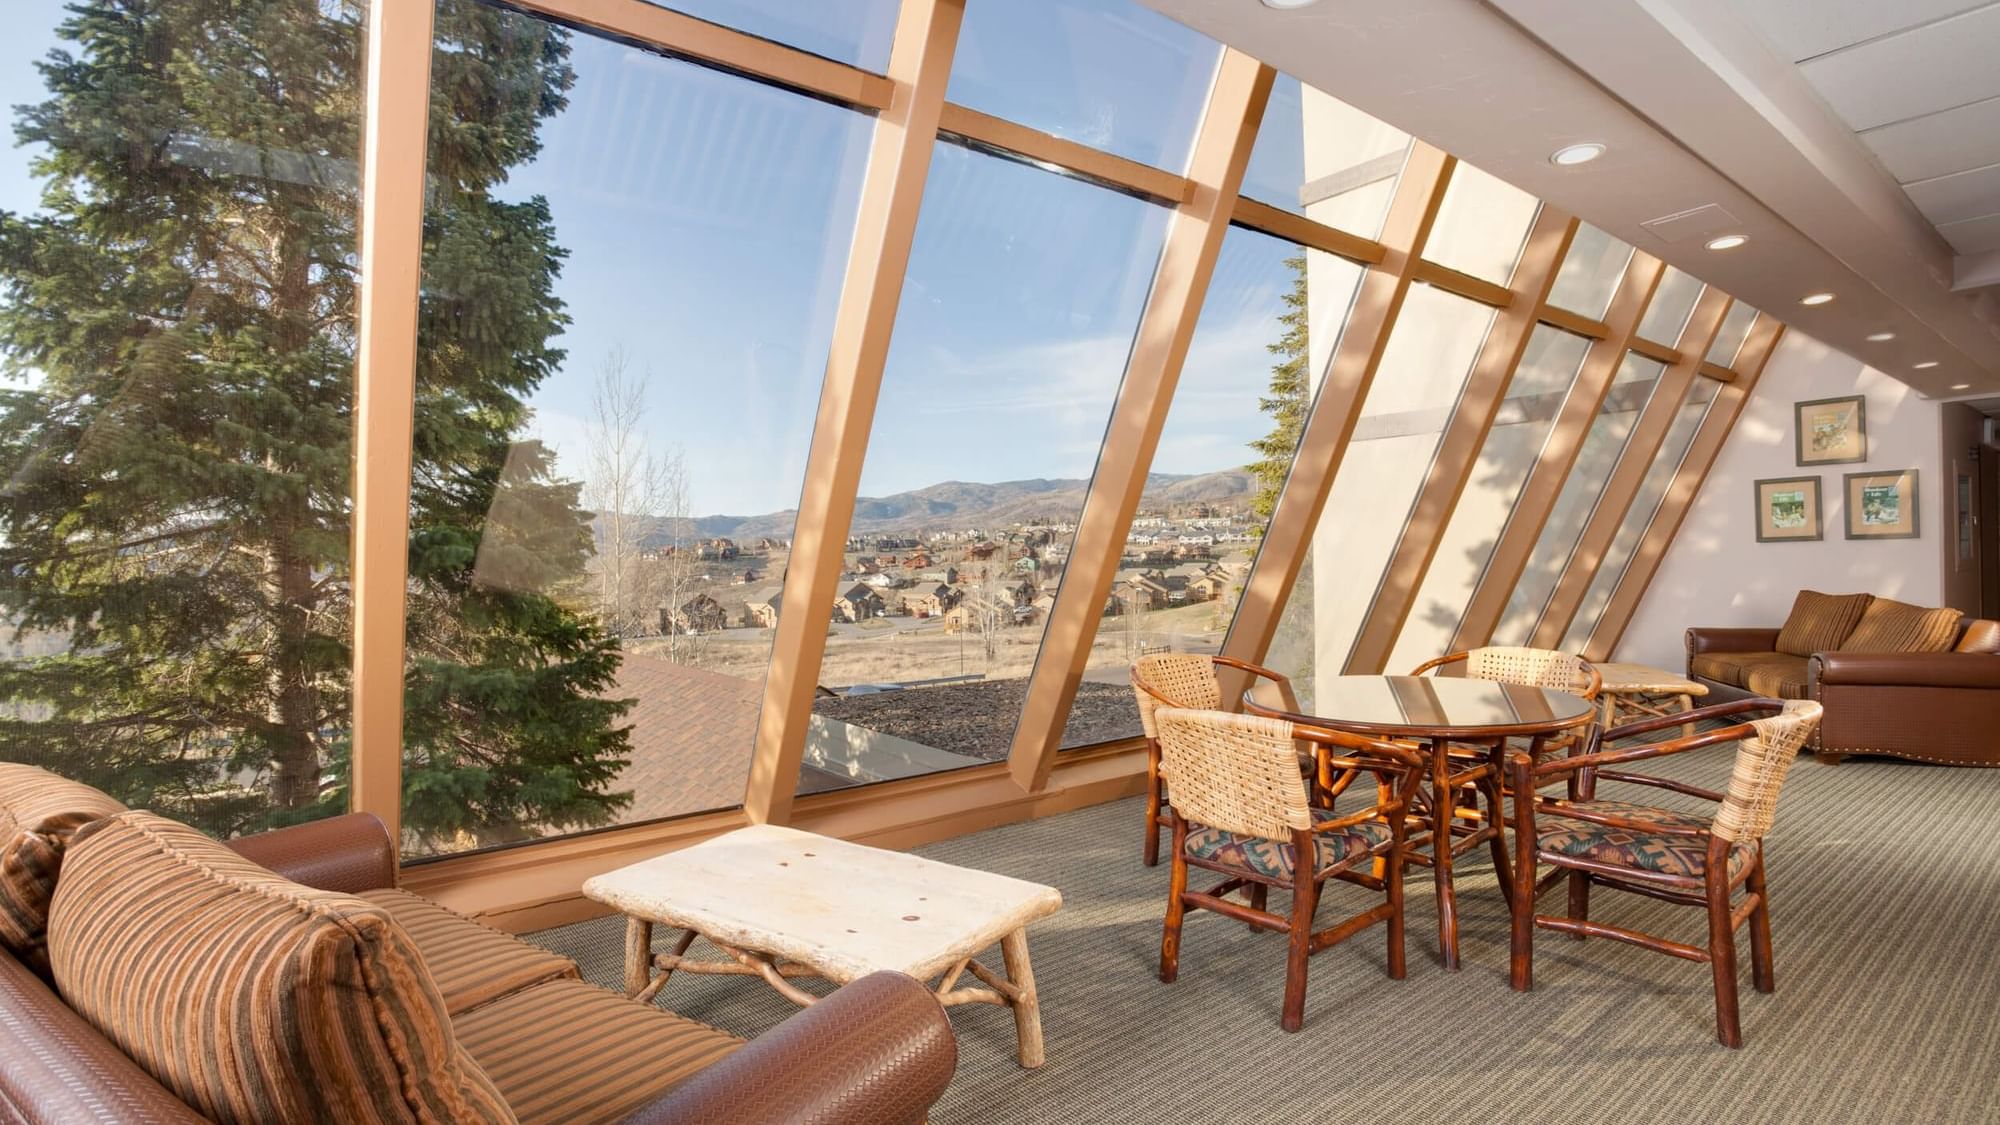  The Mezzanine of Steamboat Hilltop at Legacy Vacation Resorts 